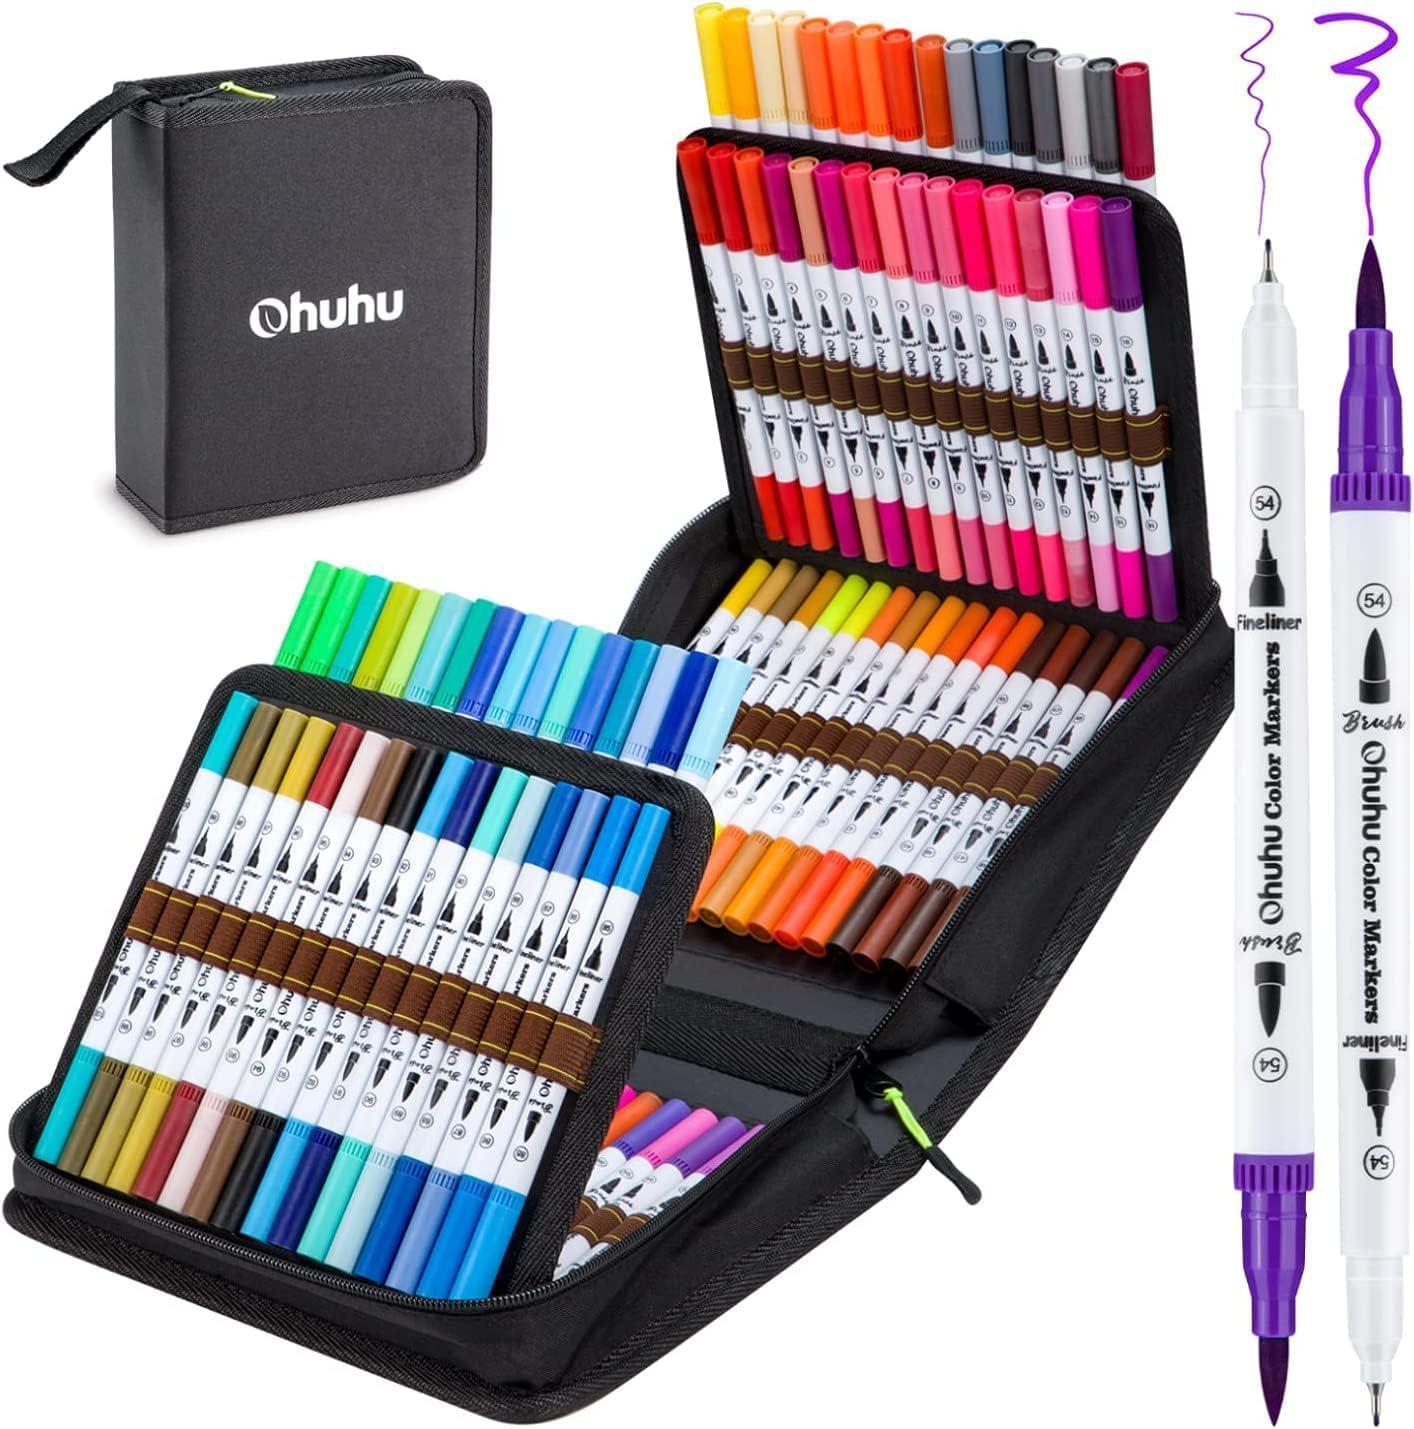 Ohuhu Markers for Adult Coloring Books: 100 and 50 similar items